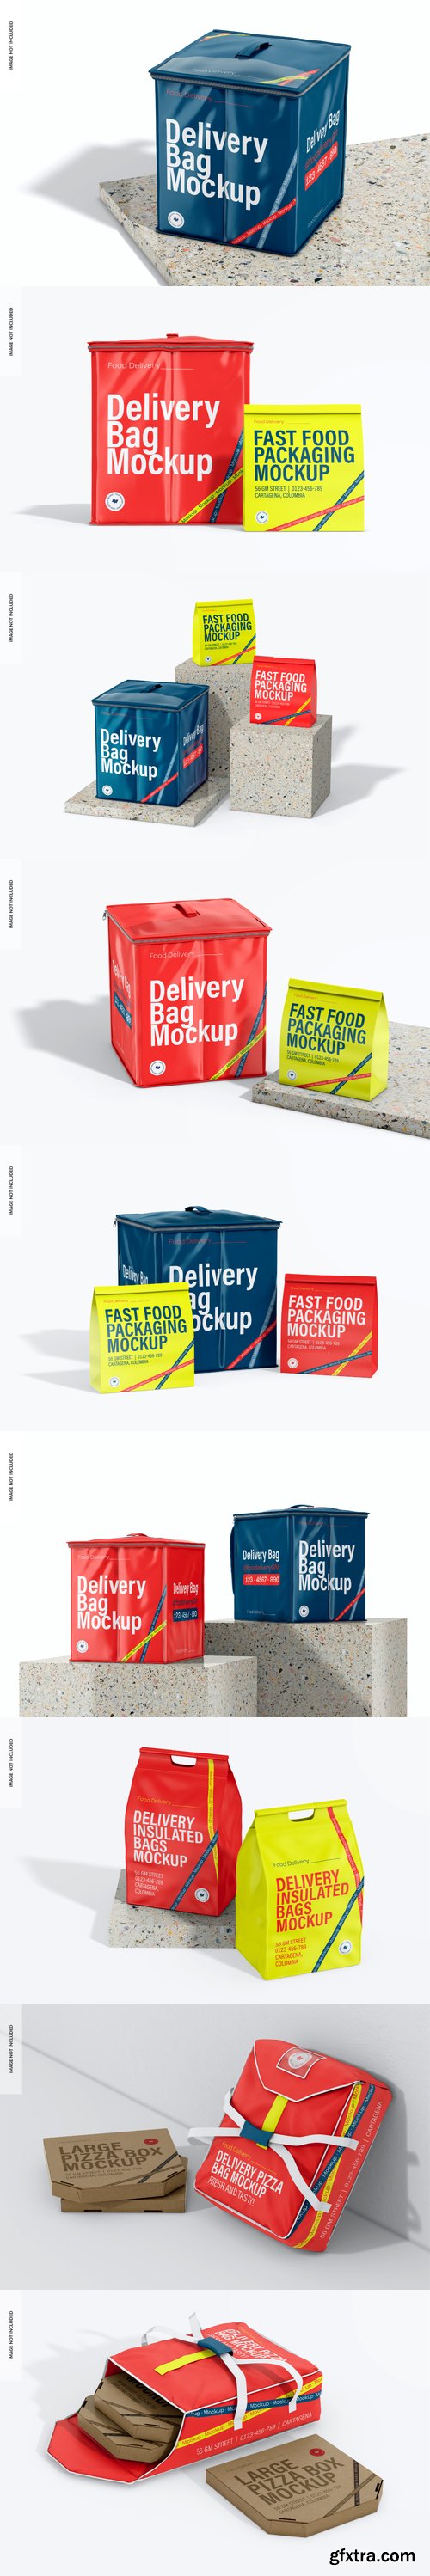 Delivery bags mockup